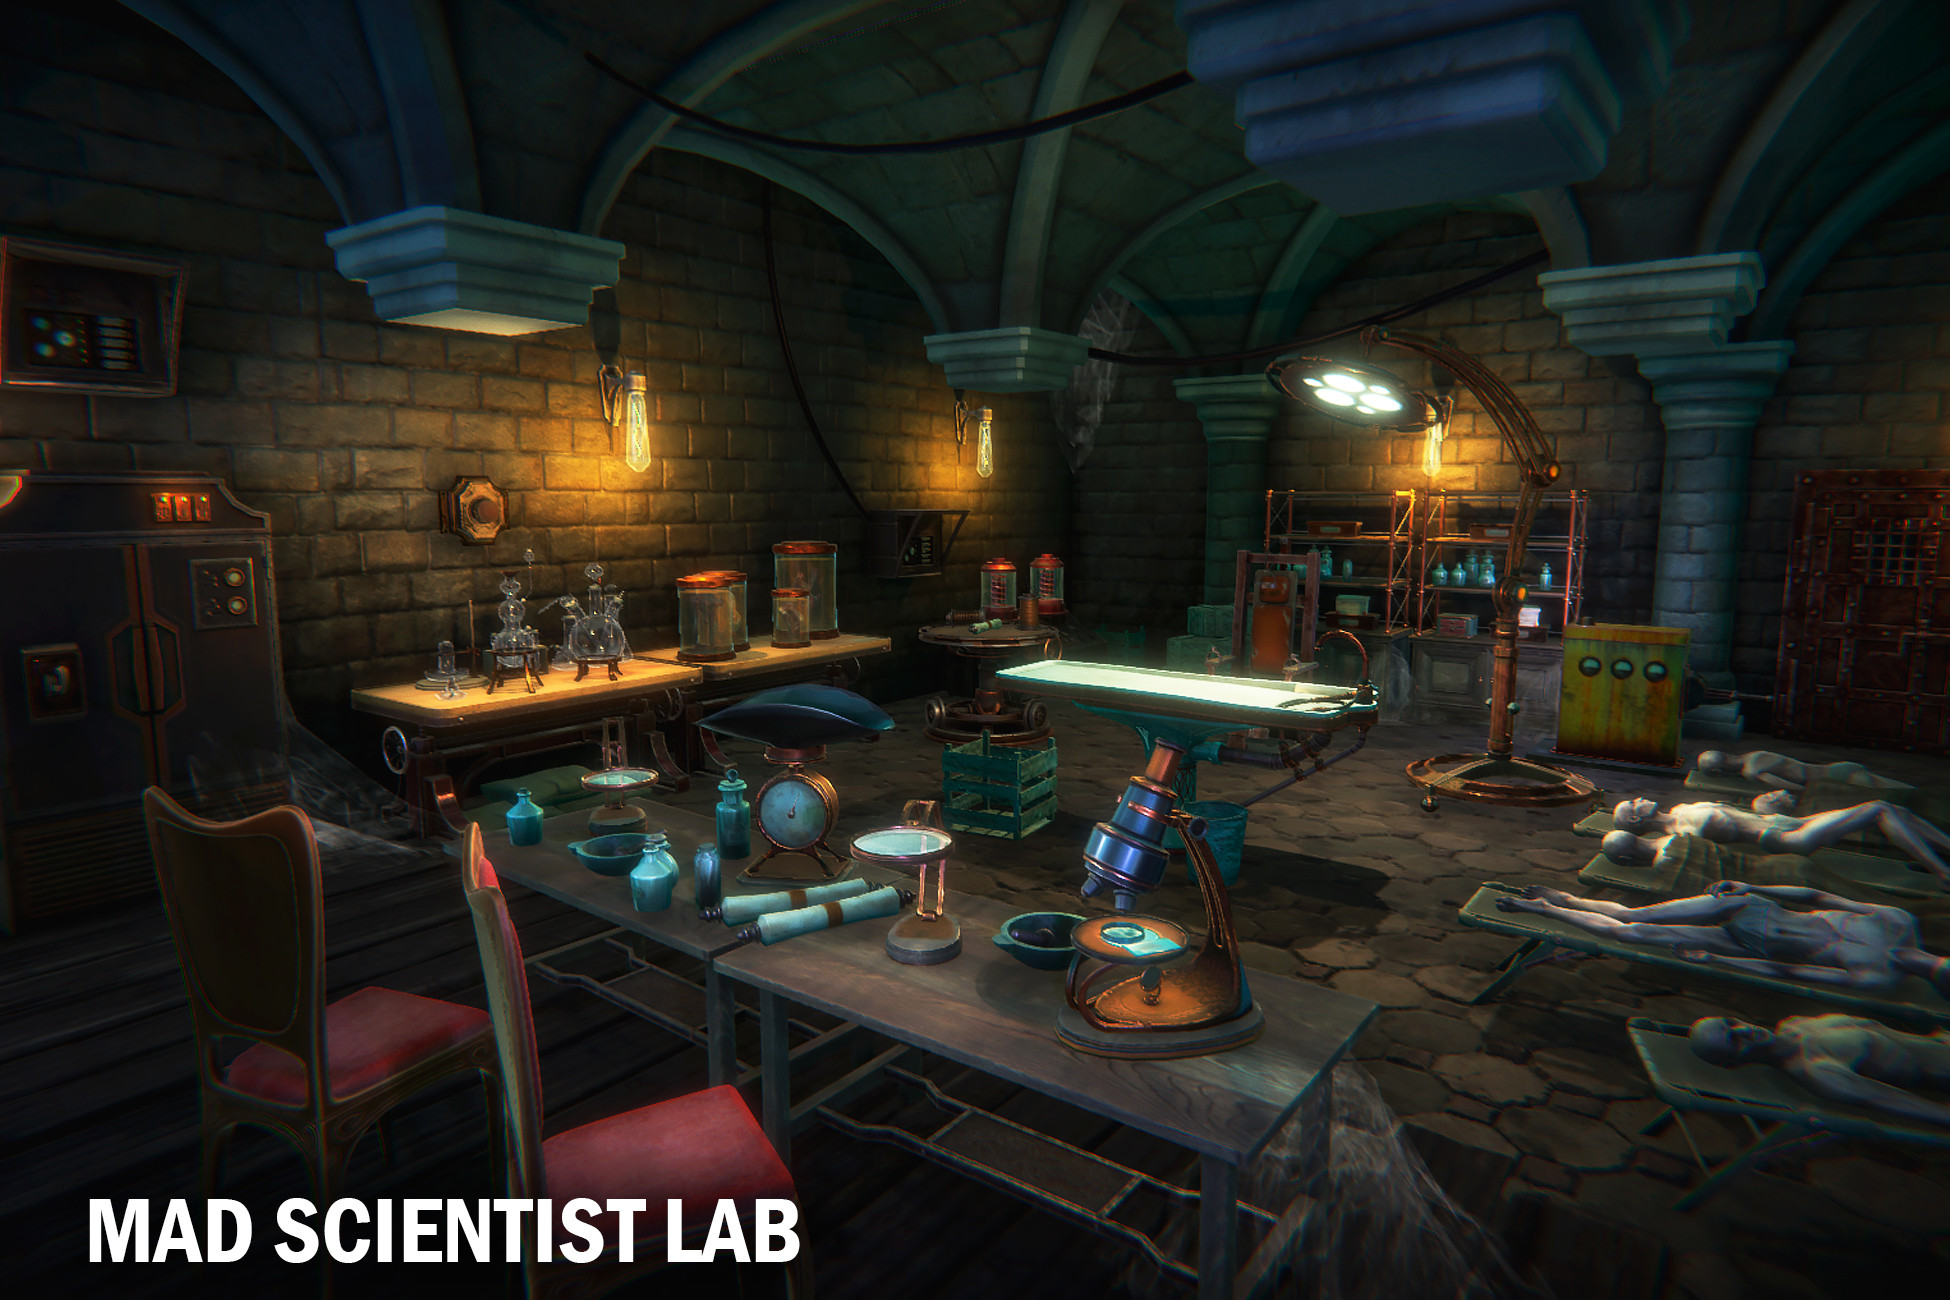 Create your very own steampunk mad scientist lab in the unity game engine